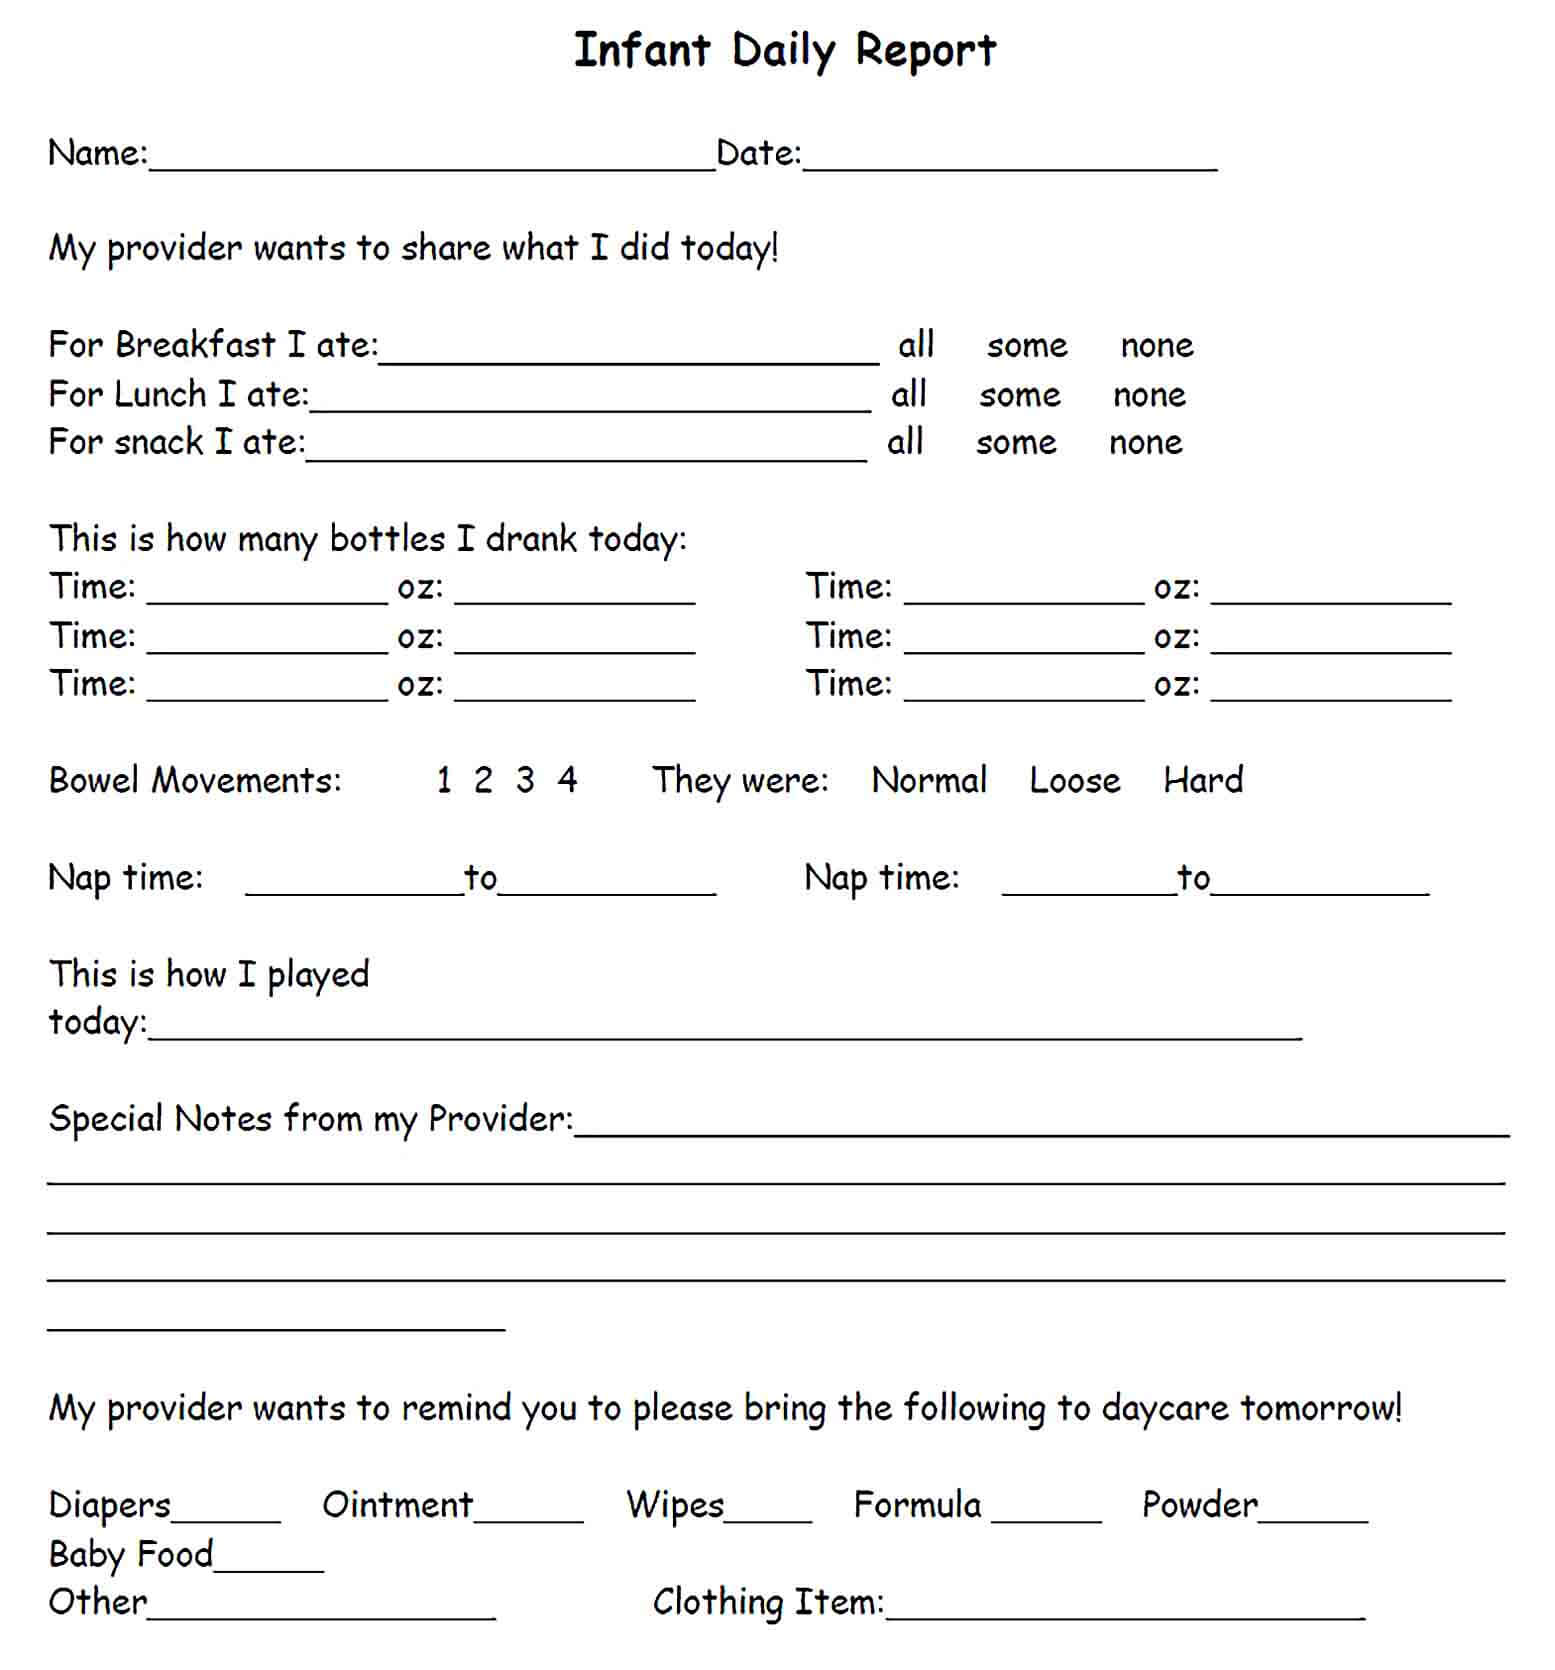 Sample Sample Infant Daily Report Template